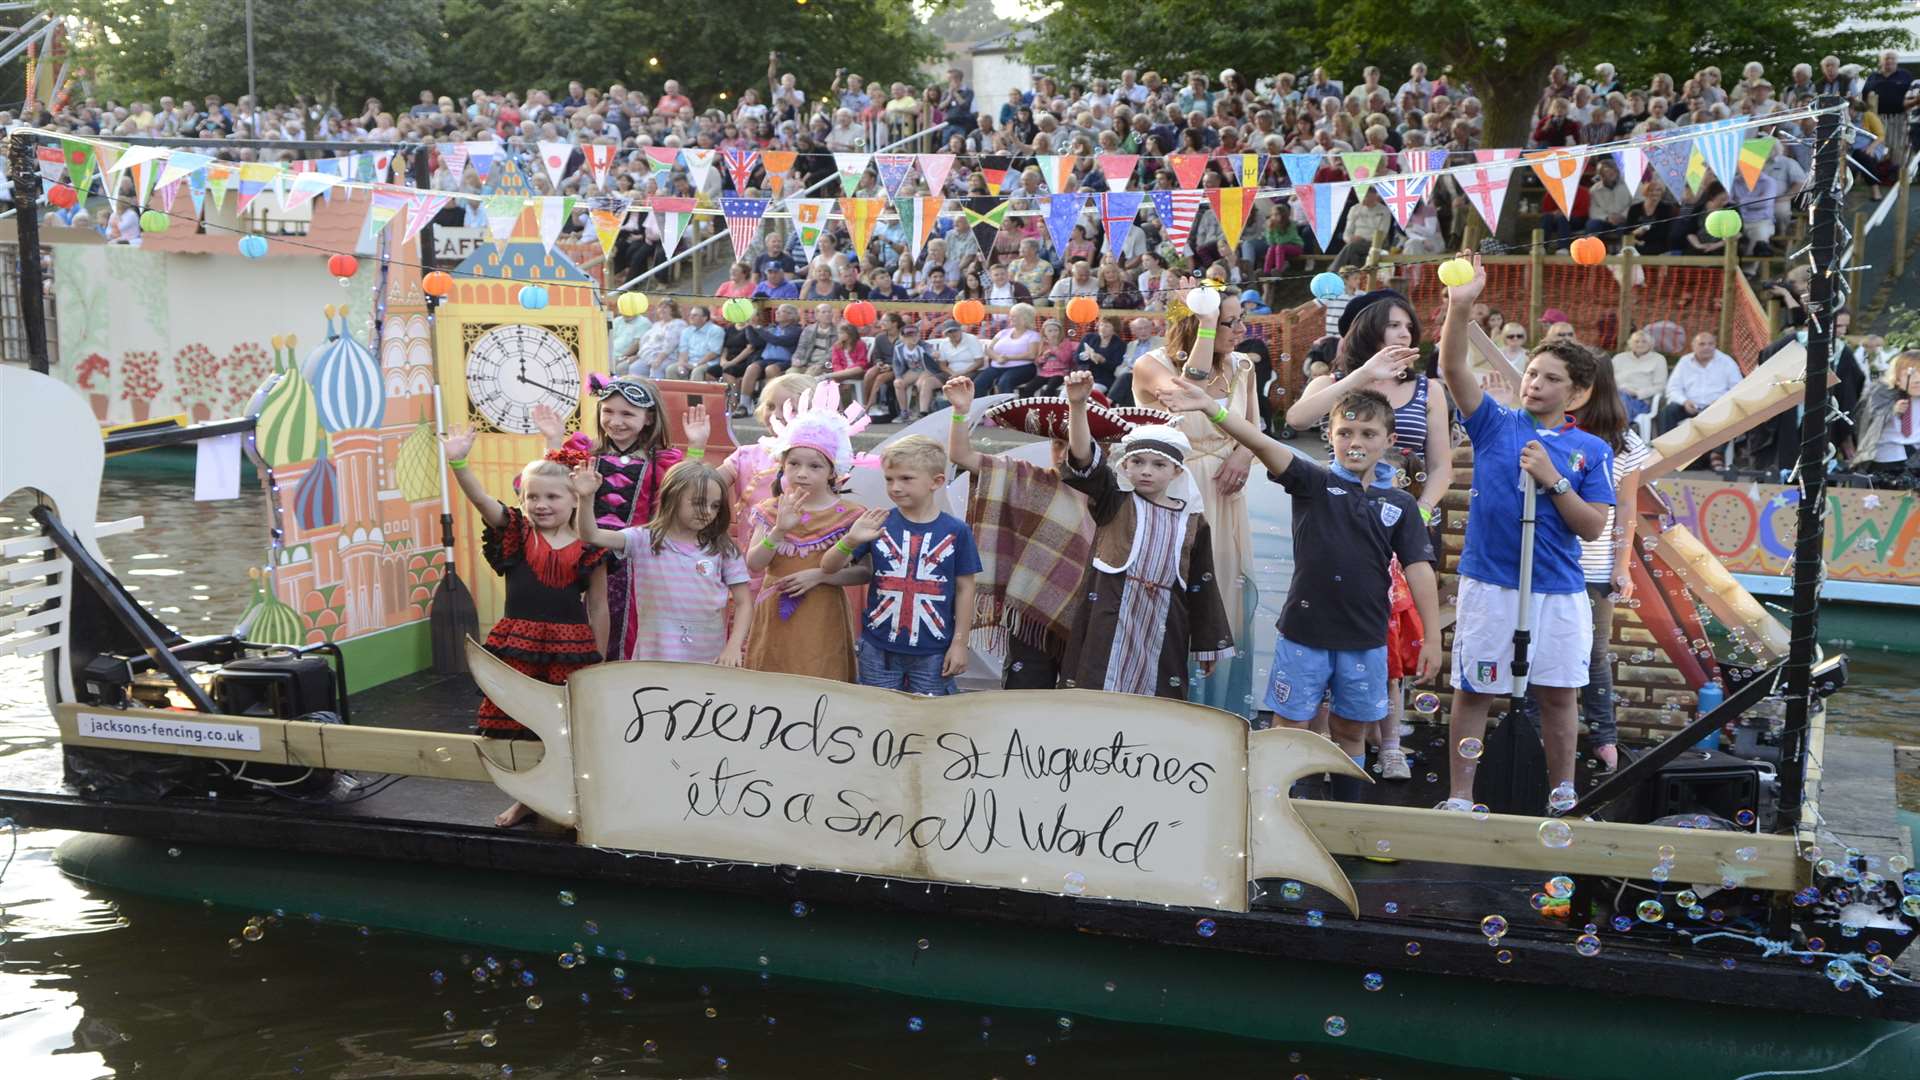 The Friends of St Augustine's float